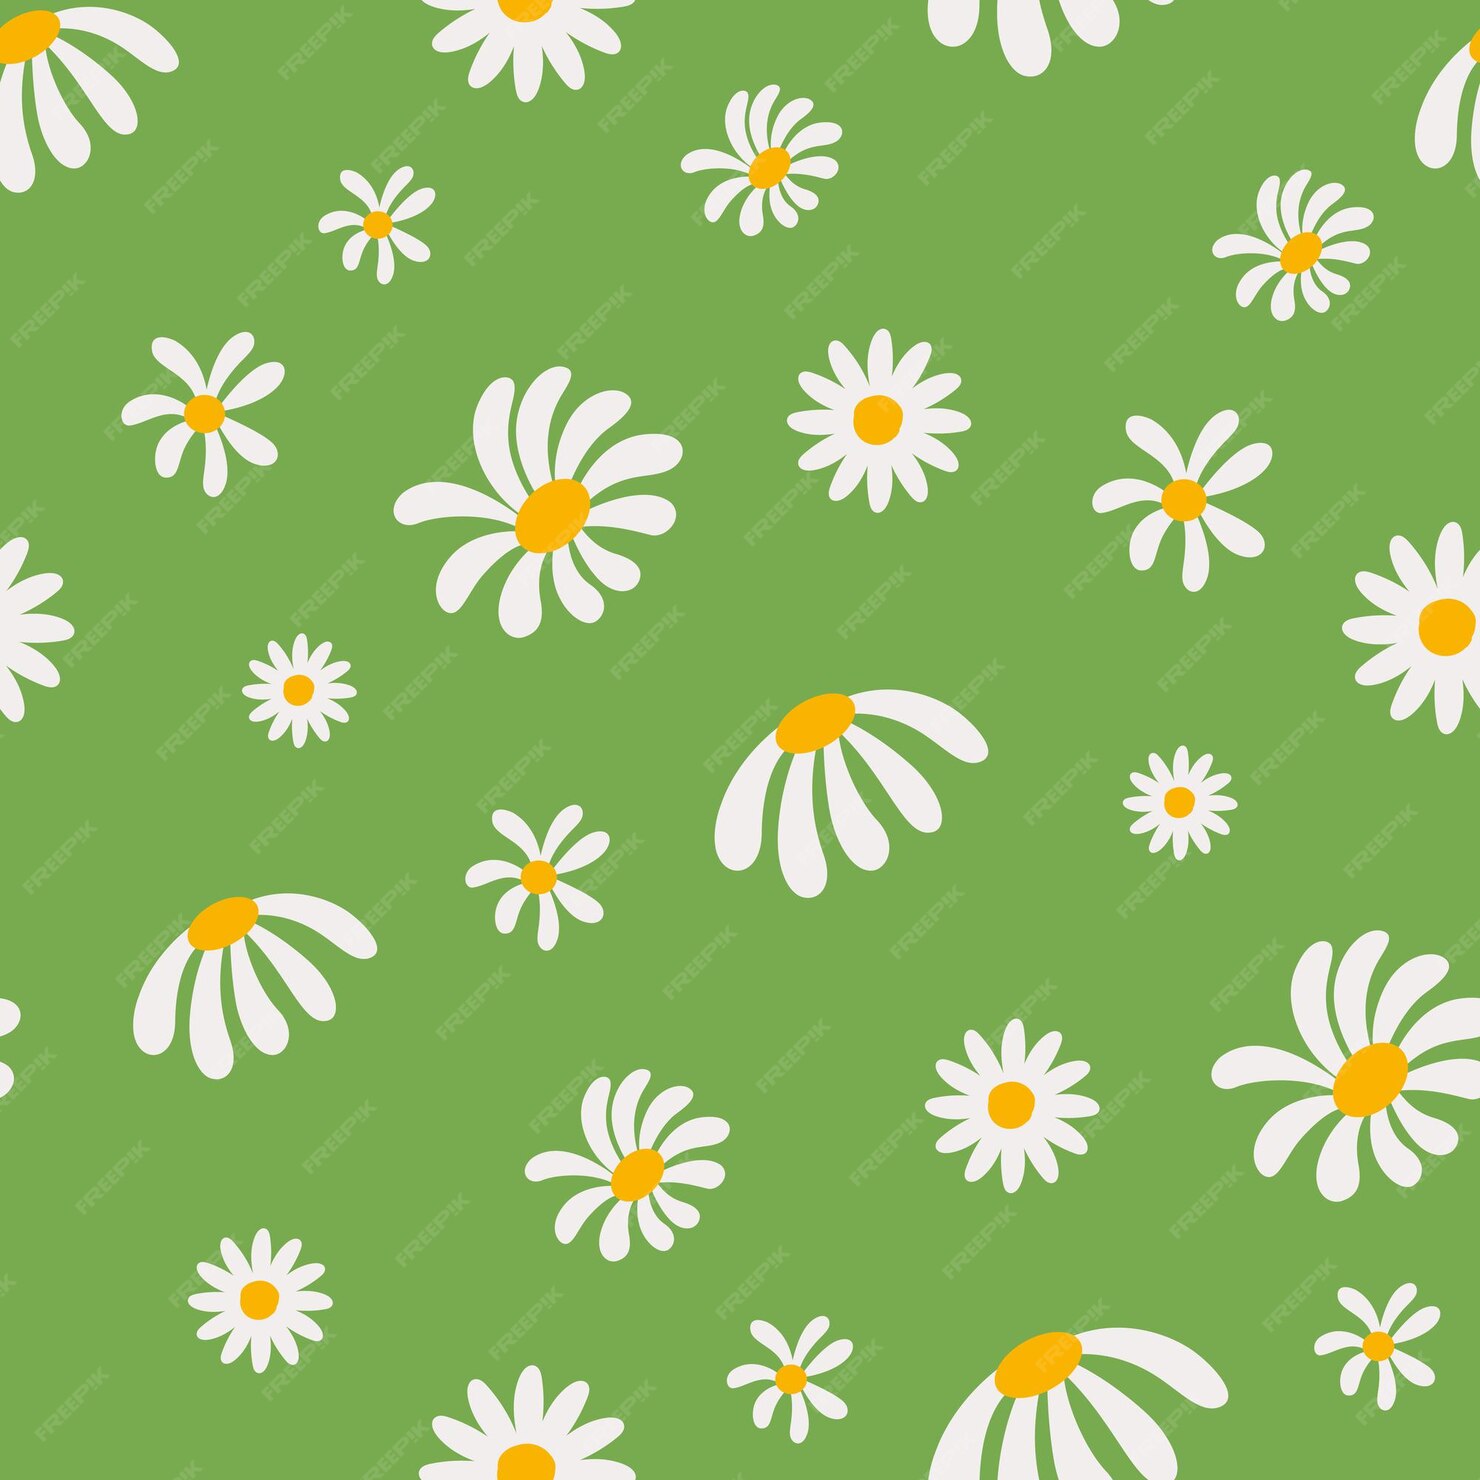 Premium Vector | Daisy flowers seamless pattern on green background